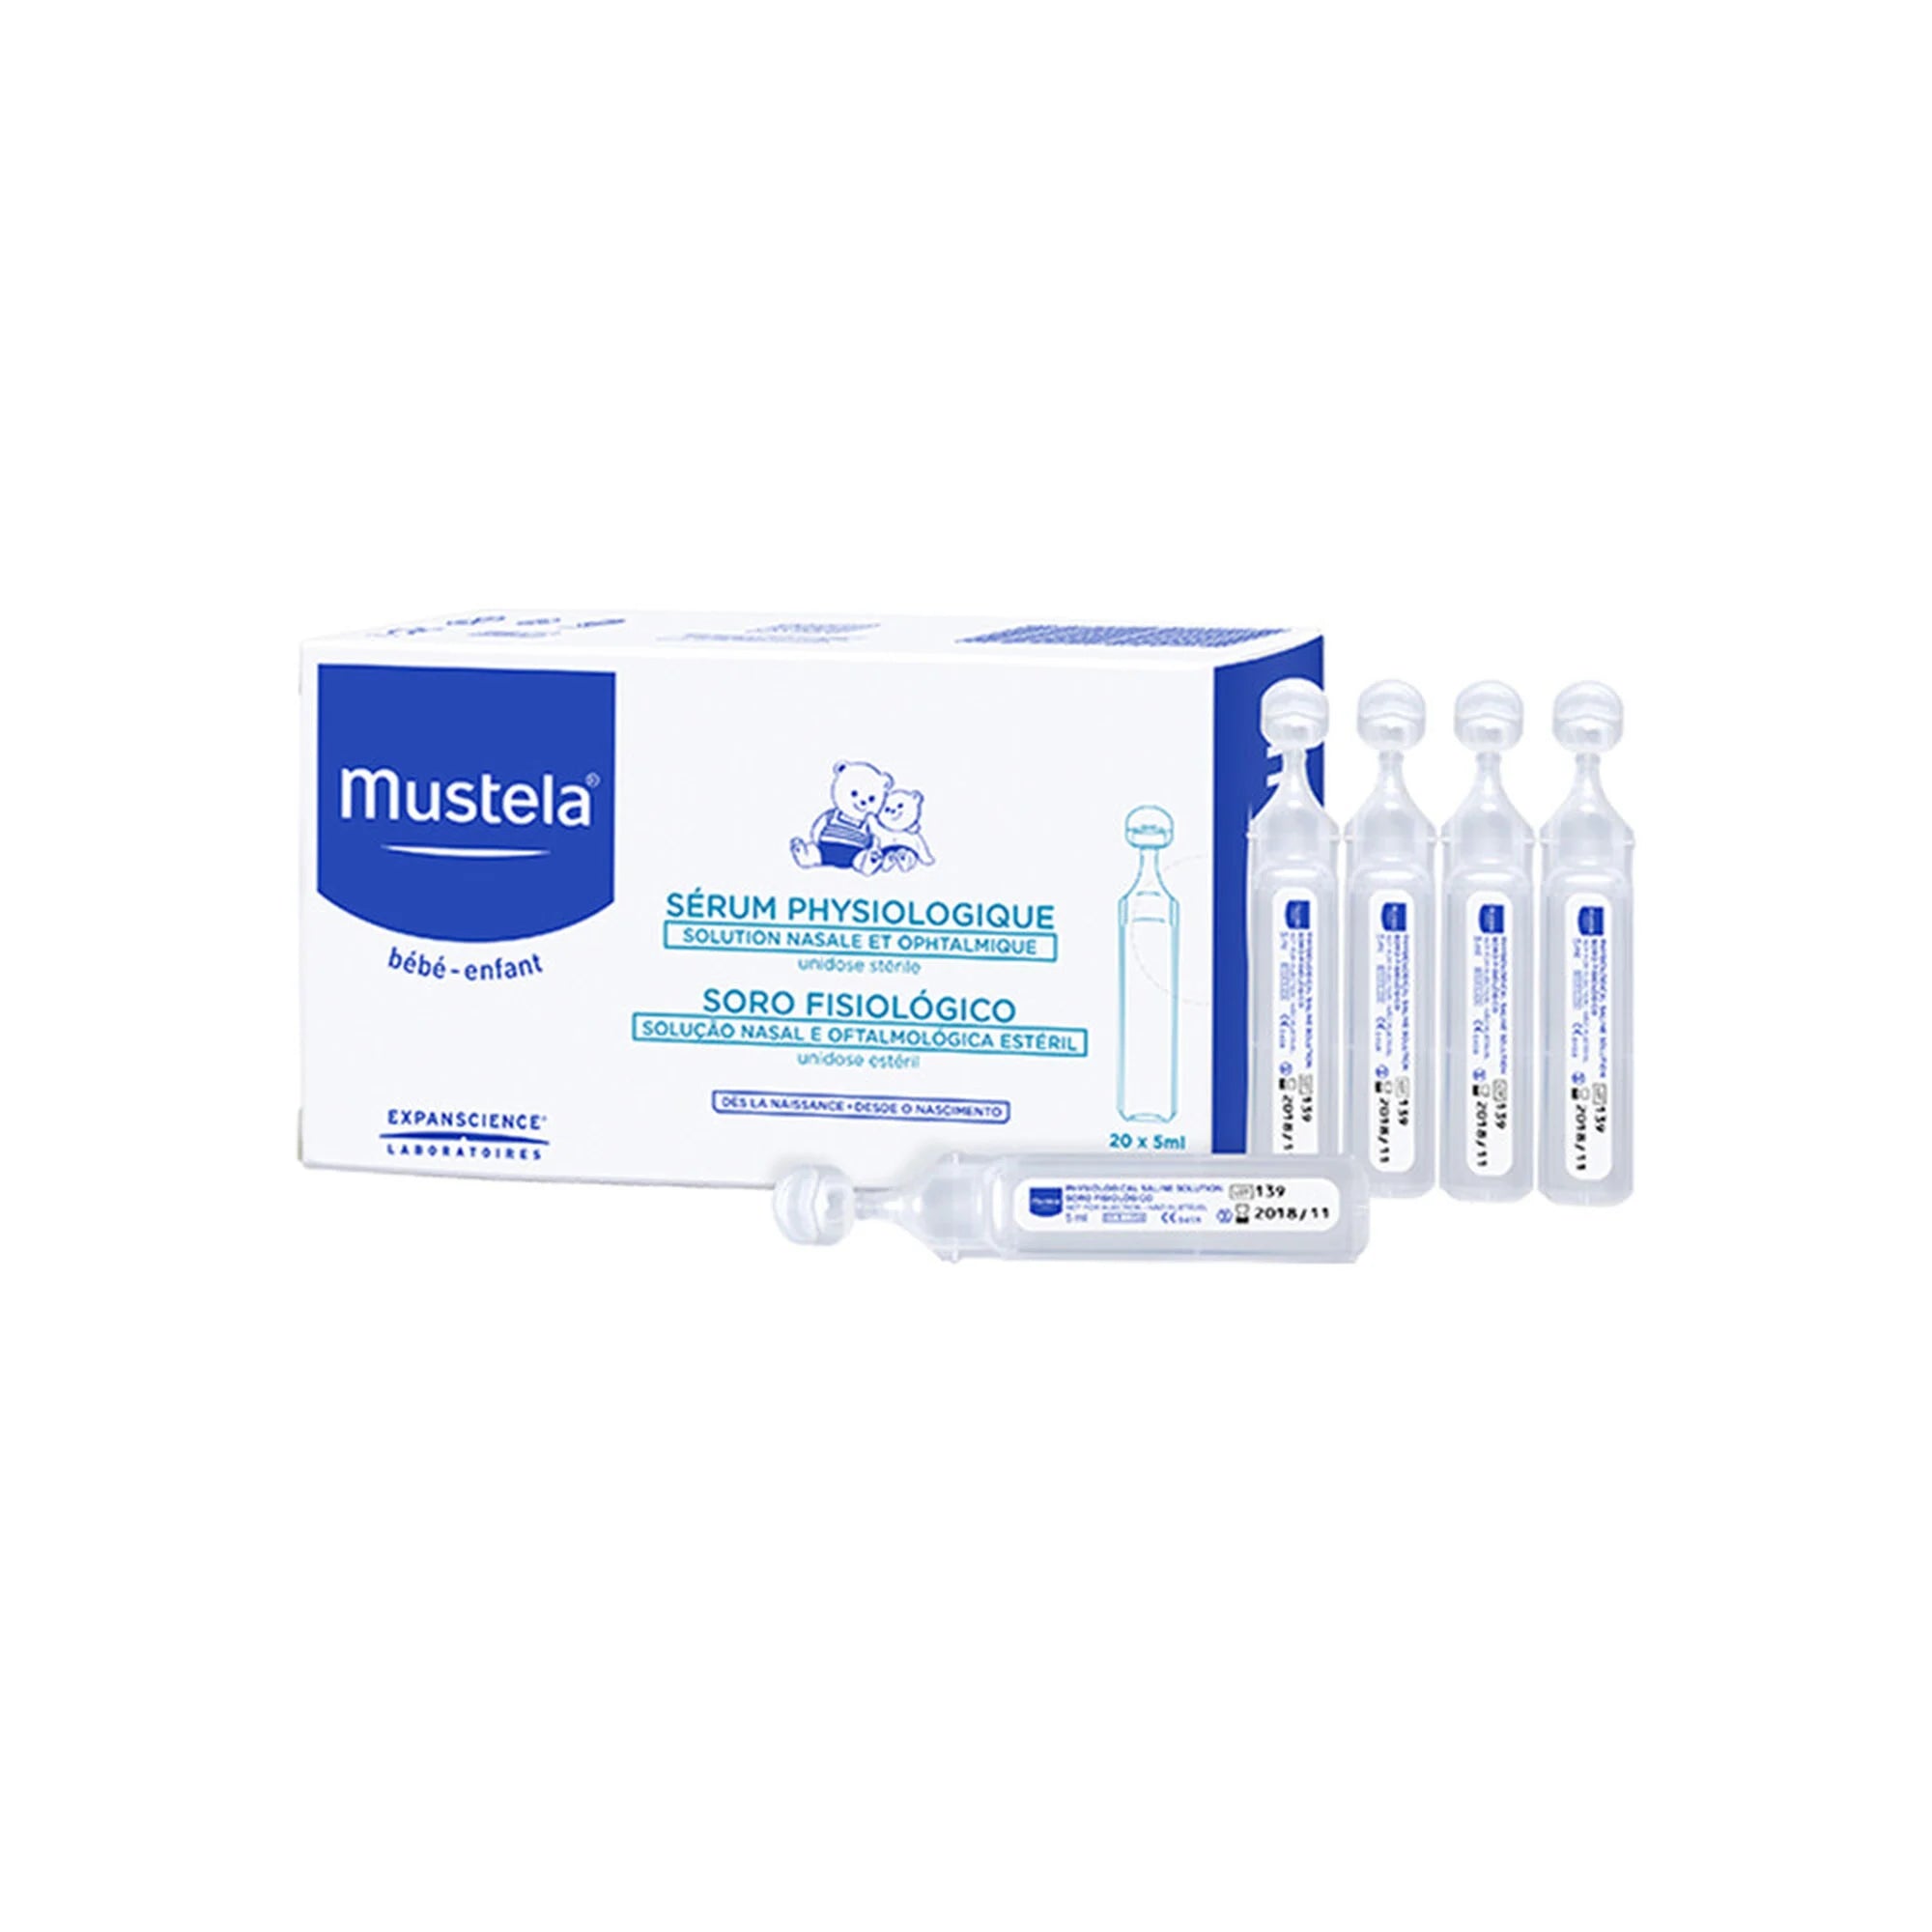 Mustela Baby Physiological Saline Solution 20x5ml